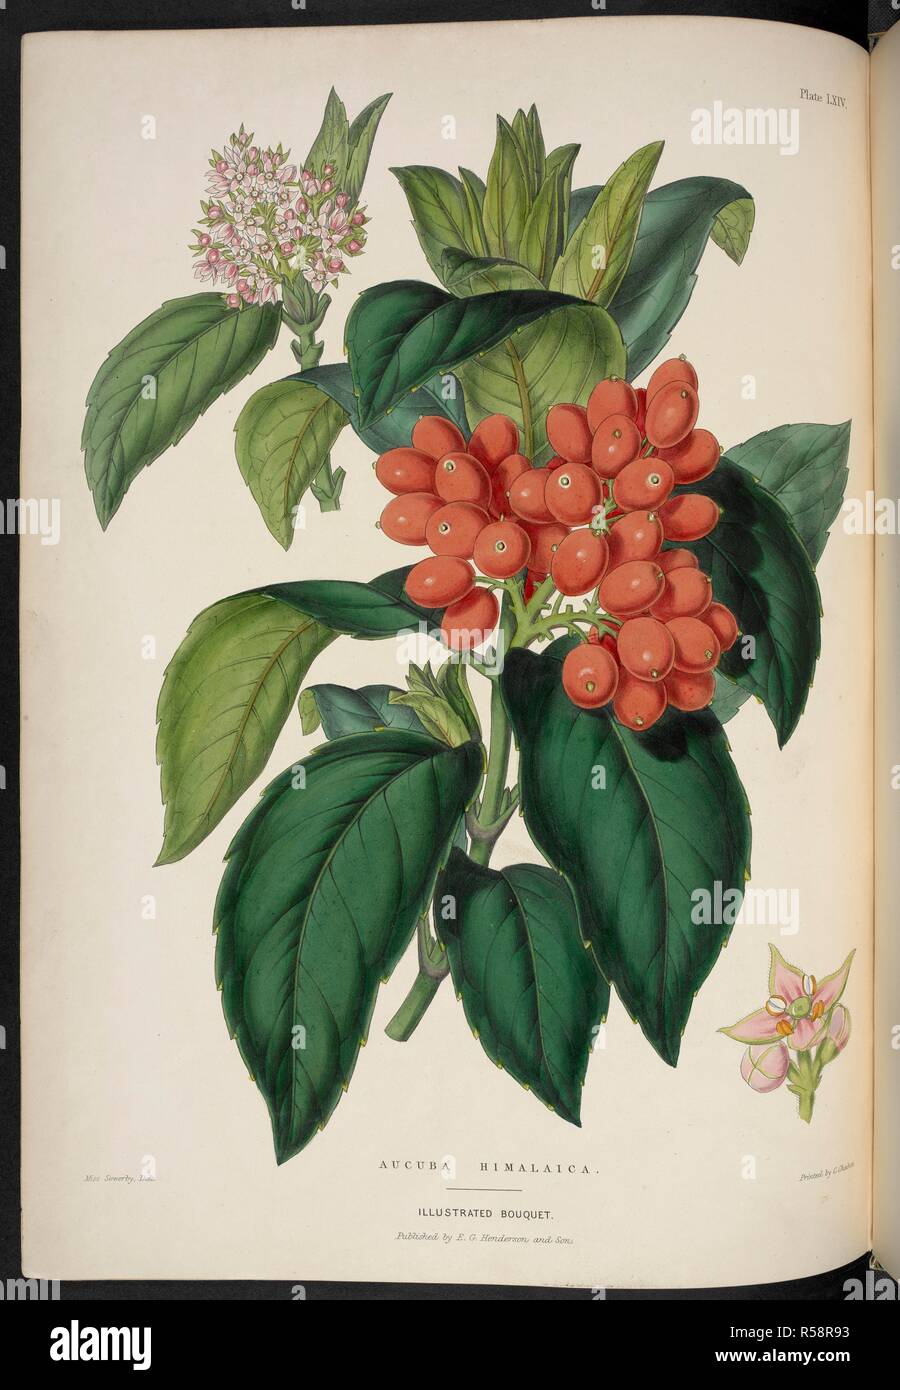 Aucuba Himalaica. . The Illustrated Bouquet, consisting of figures, with descriptions of new flowers. London, 1857-64. Source: 1823.c.13 plate 64. Author: Henderson, Edward George. Sowerby, Miss. Stock Photo